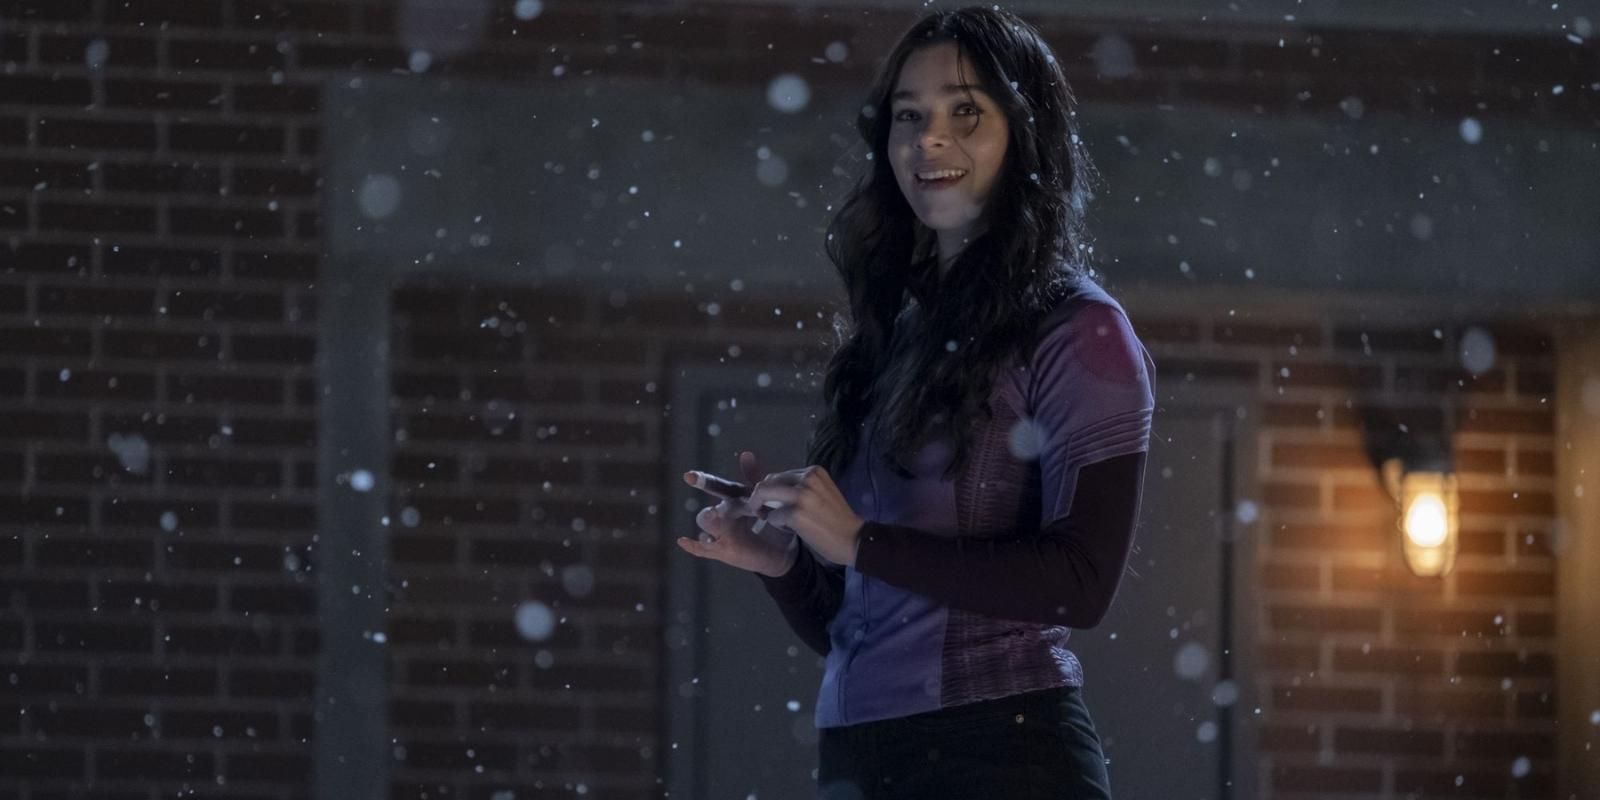 Kate Bishop smiles in the snow in her archery shirt in Hawkeye